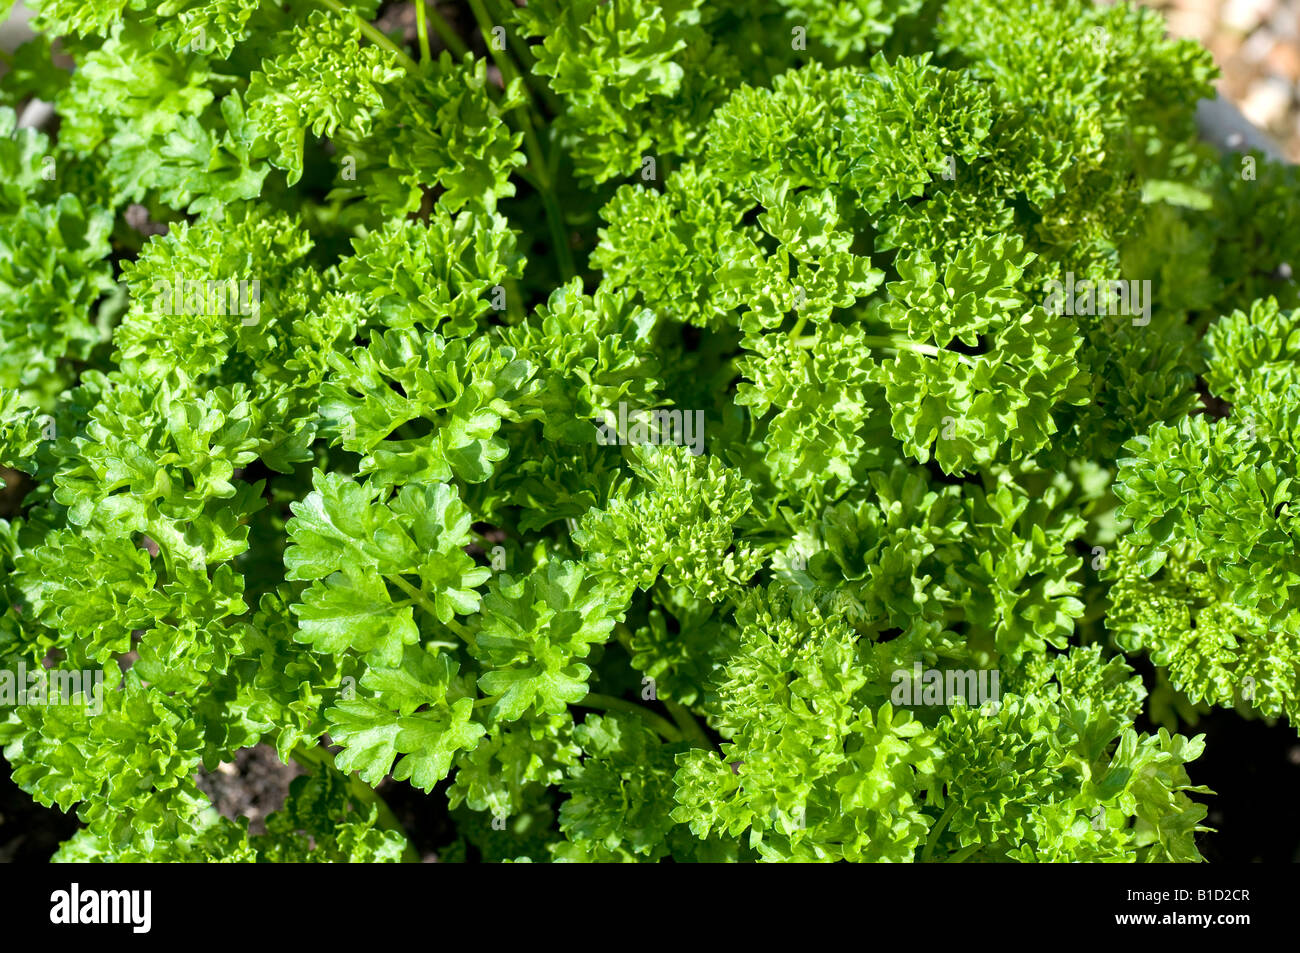 The edible herb curled leaf parsley Stock Photo